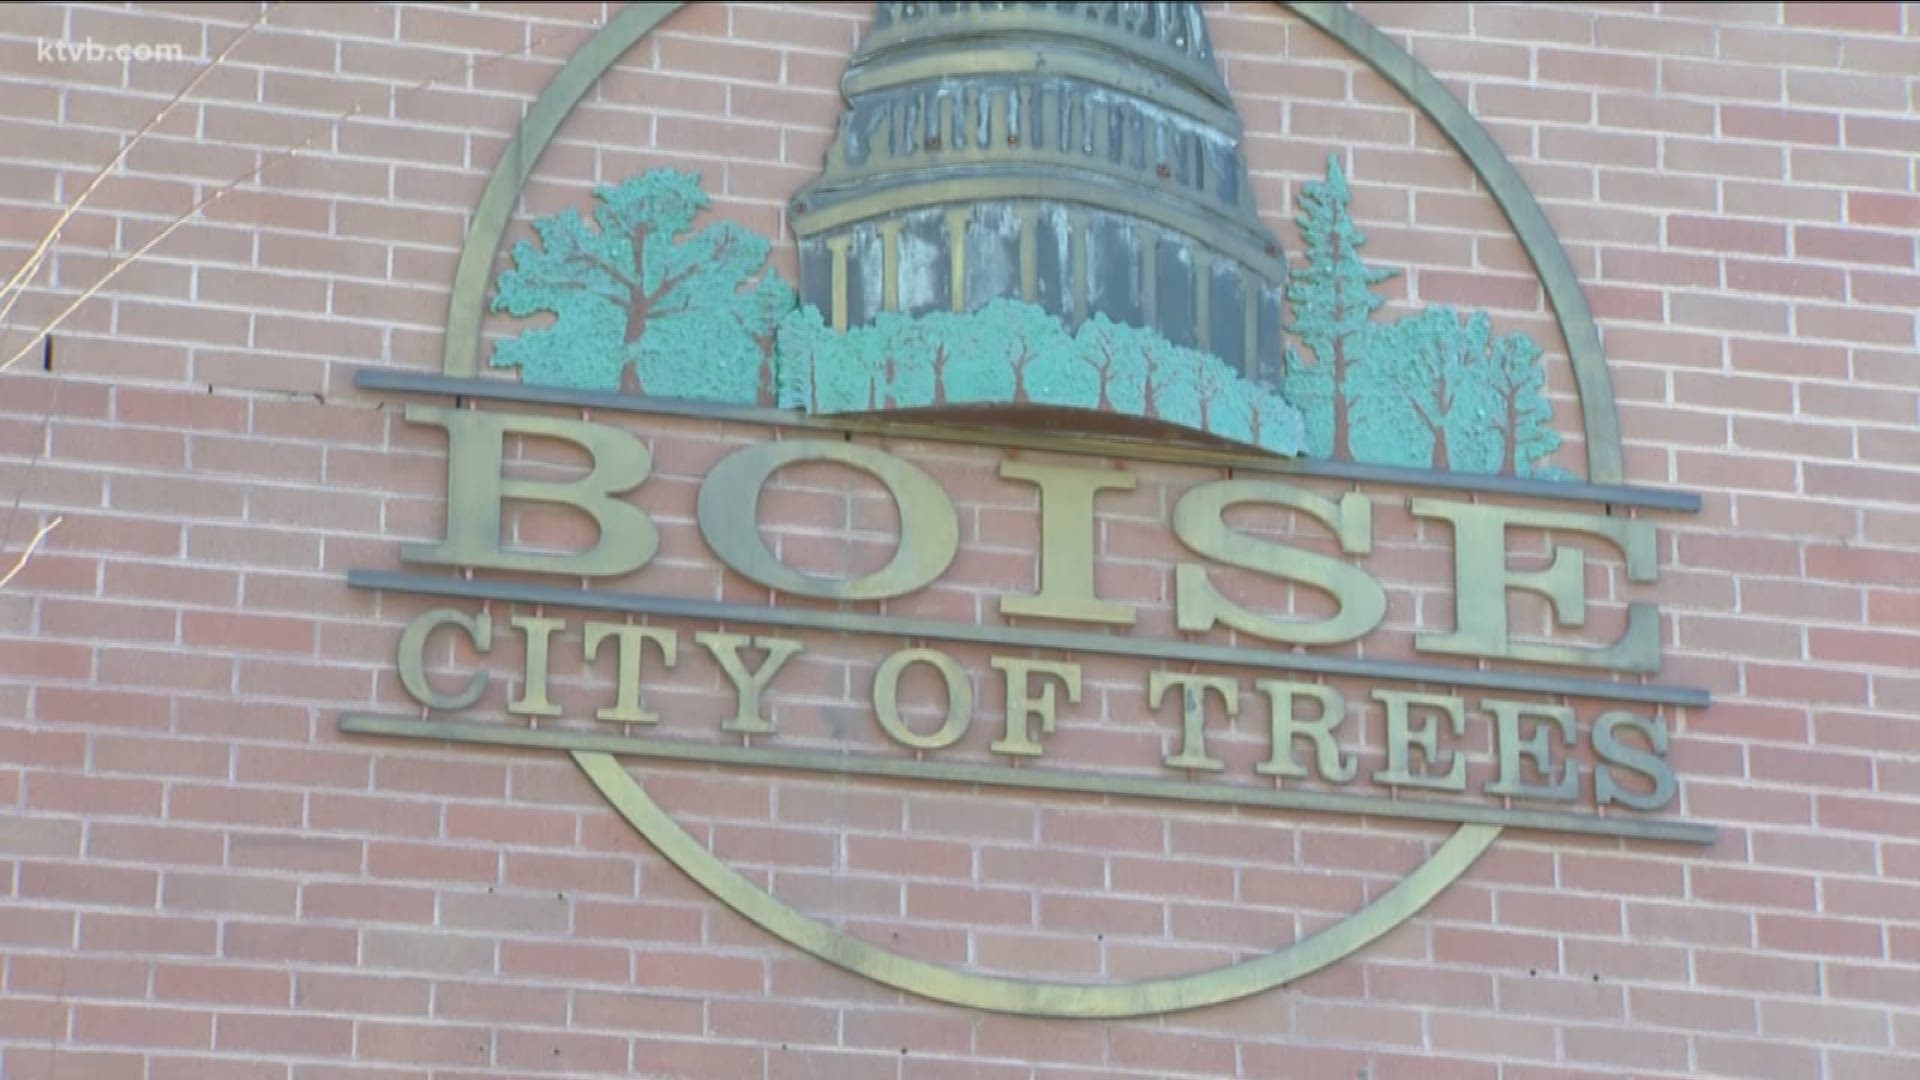 The years-long drama over the two projects took another turn when the City of Boise floated the idea of using cash to help pay for the projects, a move that Boise Working Together says is just another way that the city is trying to avoid having the projects on the ballot.